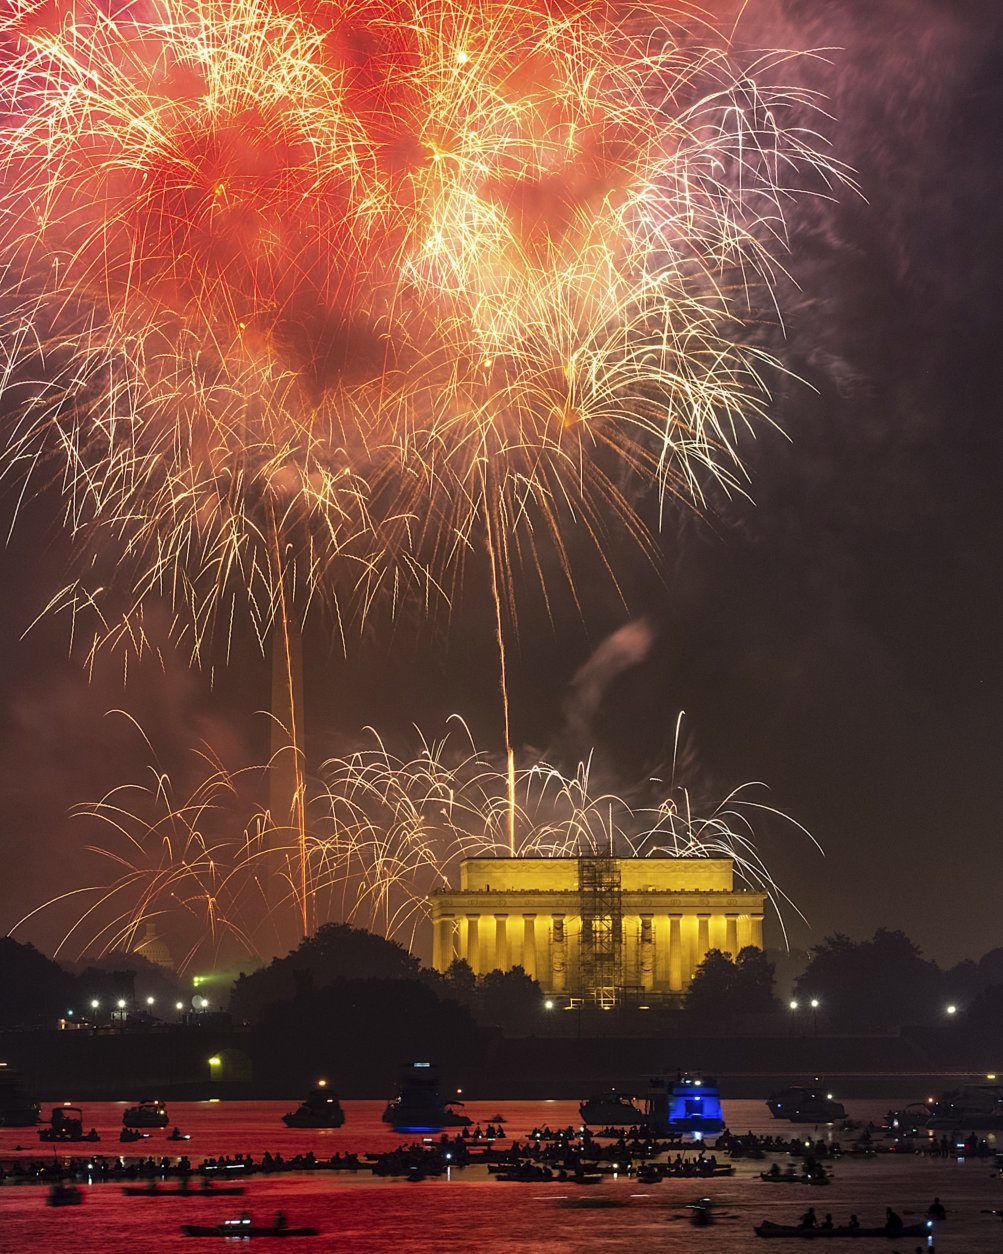 Boaters on the Potomac River in Washington watch the fireworks display on the National Mall Wednesday, July 4, 2018, in celebration of Independence Day. (AP Photo/J. David Ake)